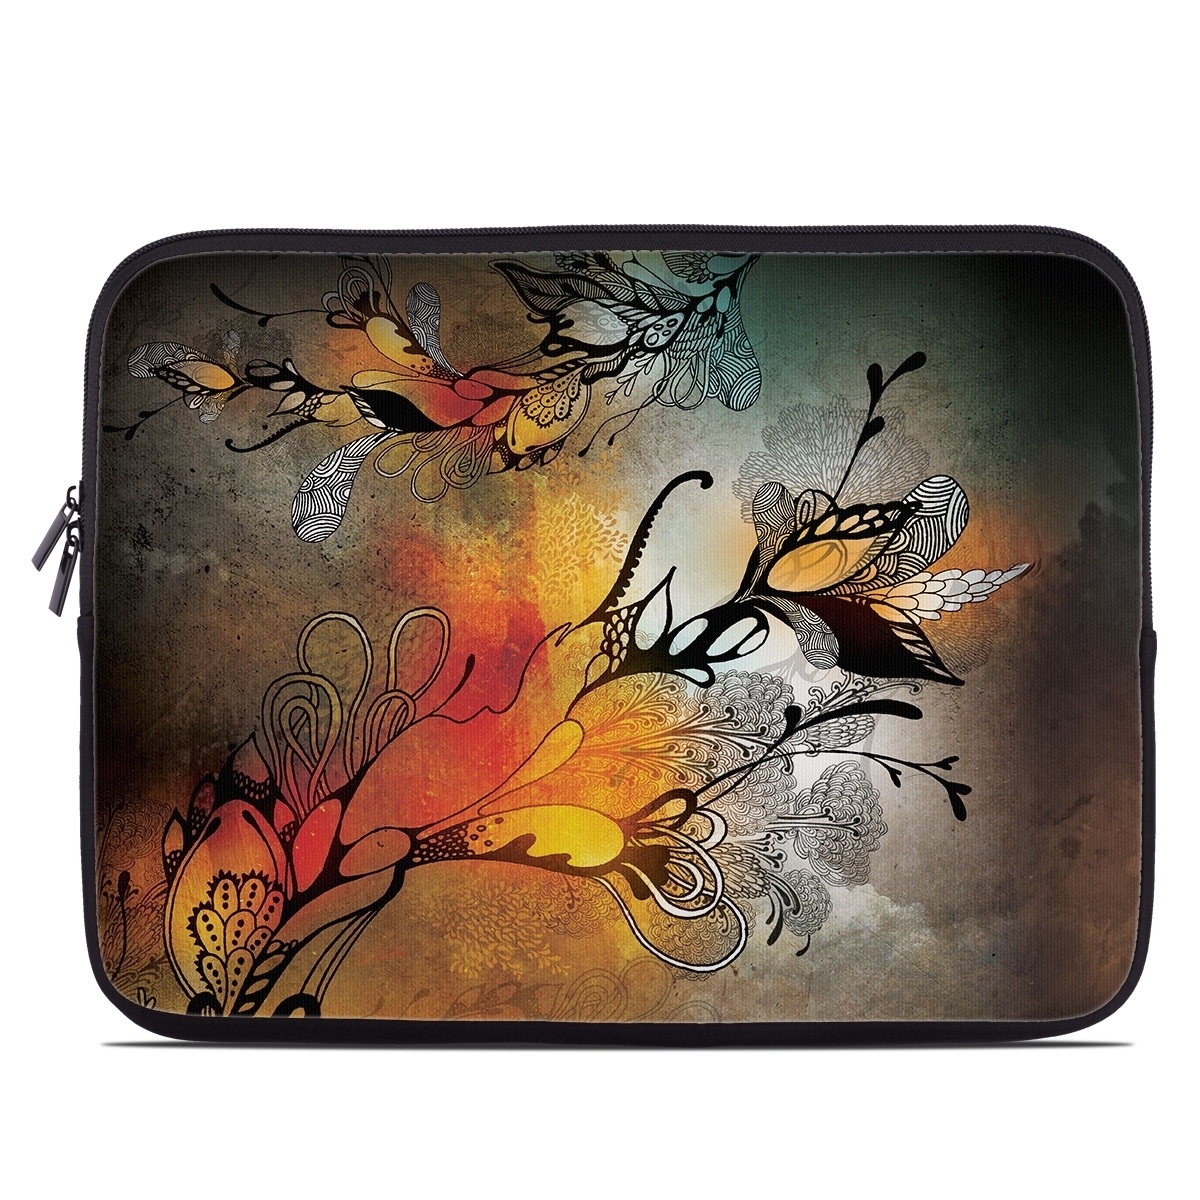 Laptop Sleeve - Before The Storm (Image 1)